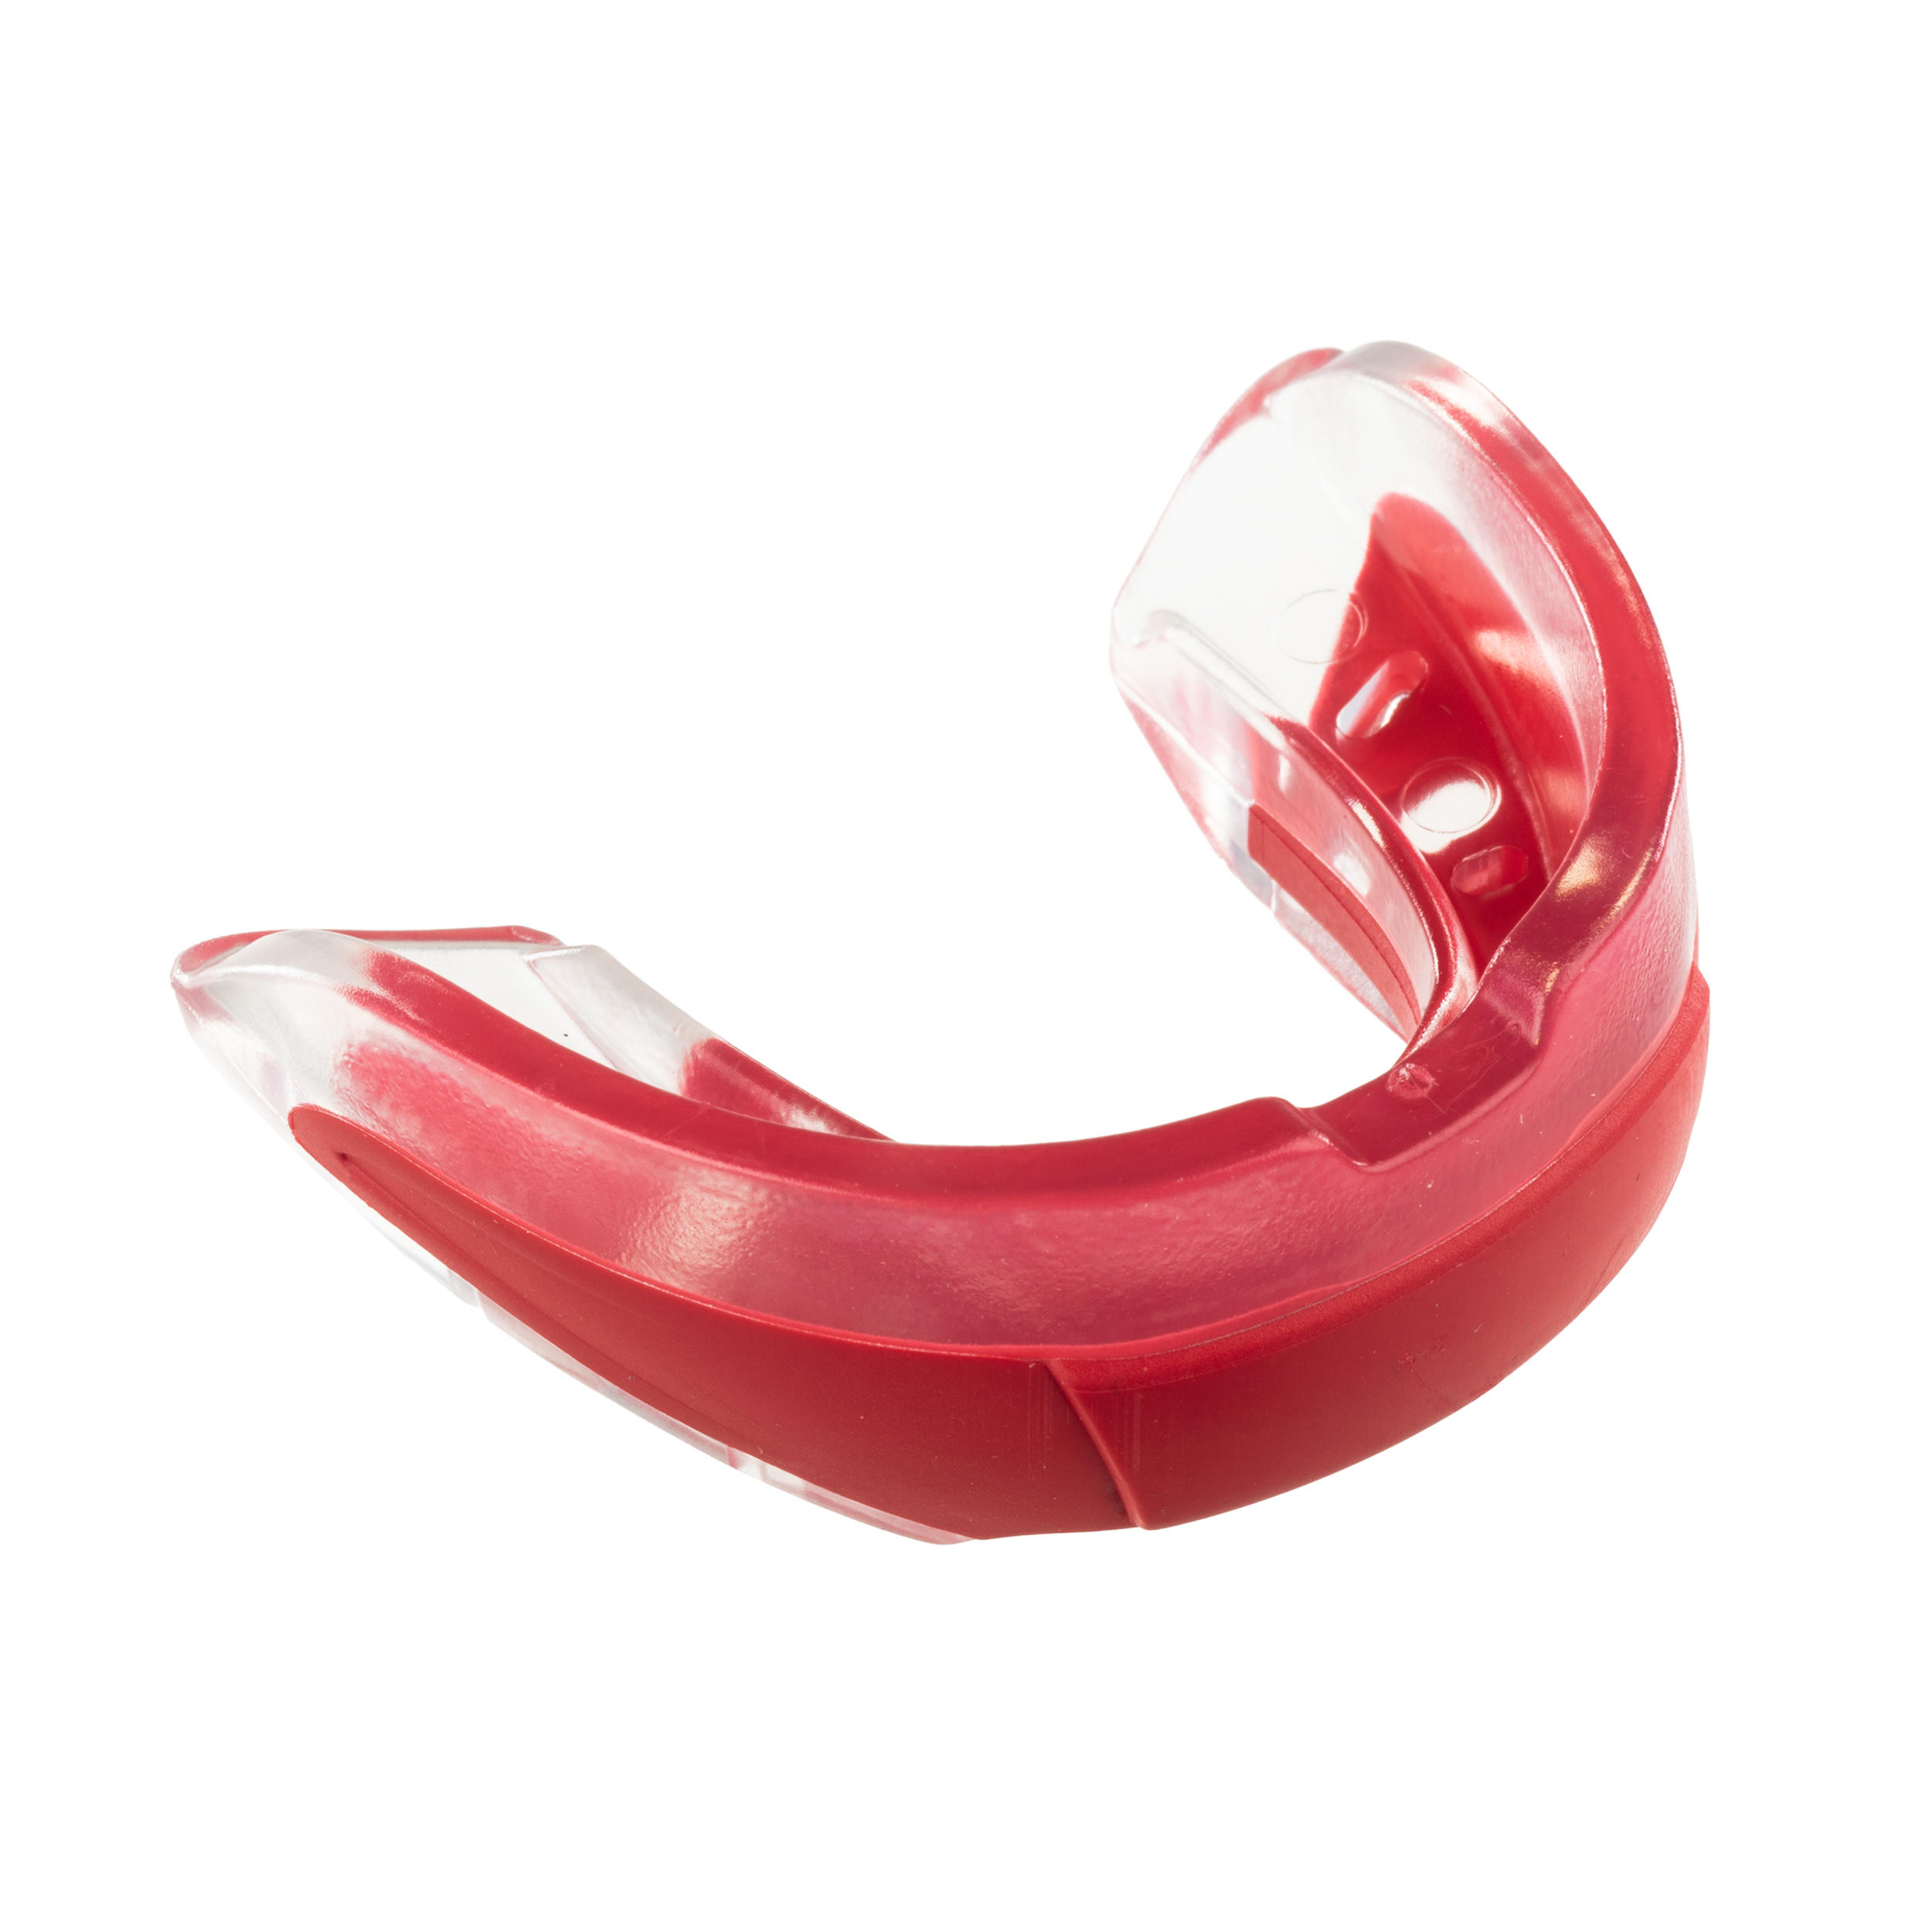 OFFLOAD Rugby Mouthguard R500 Size M (Players 1.4 m To 1.7 m) - Red